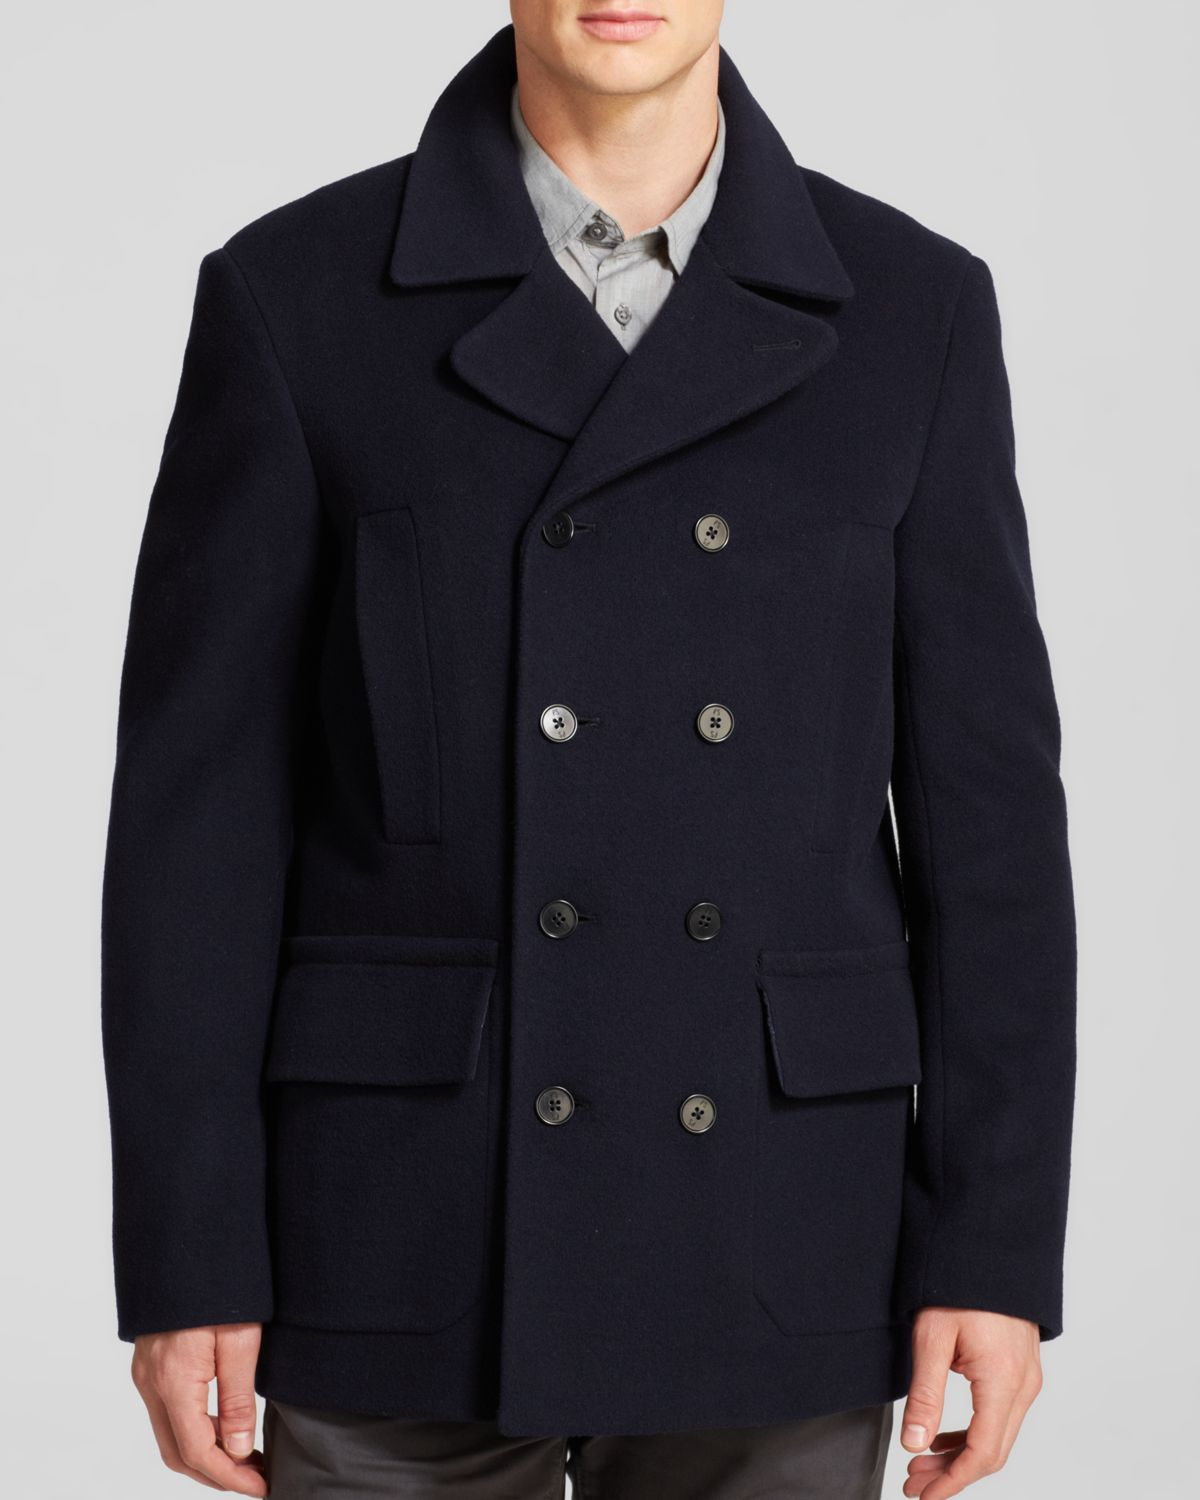 Paul Smith Ps Double Breasted Car Coat in Navy (Blue) for Men - Lyst